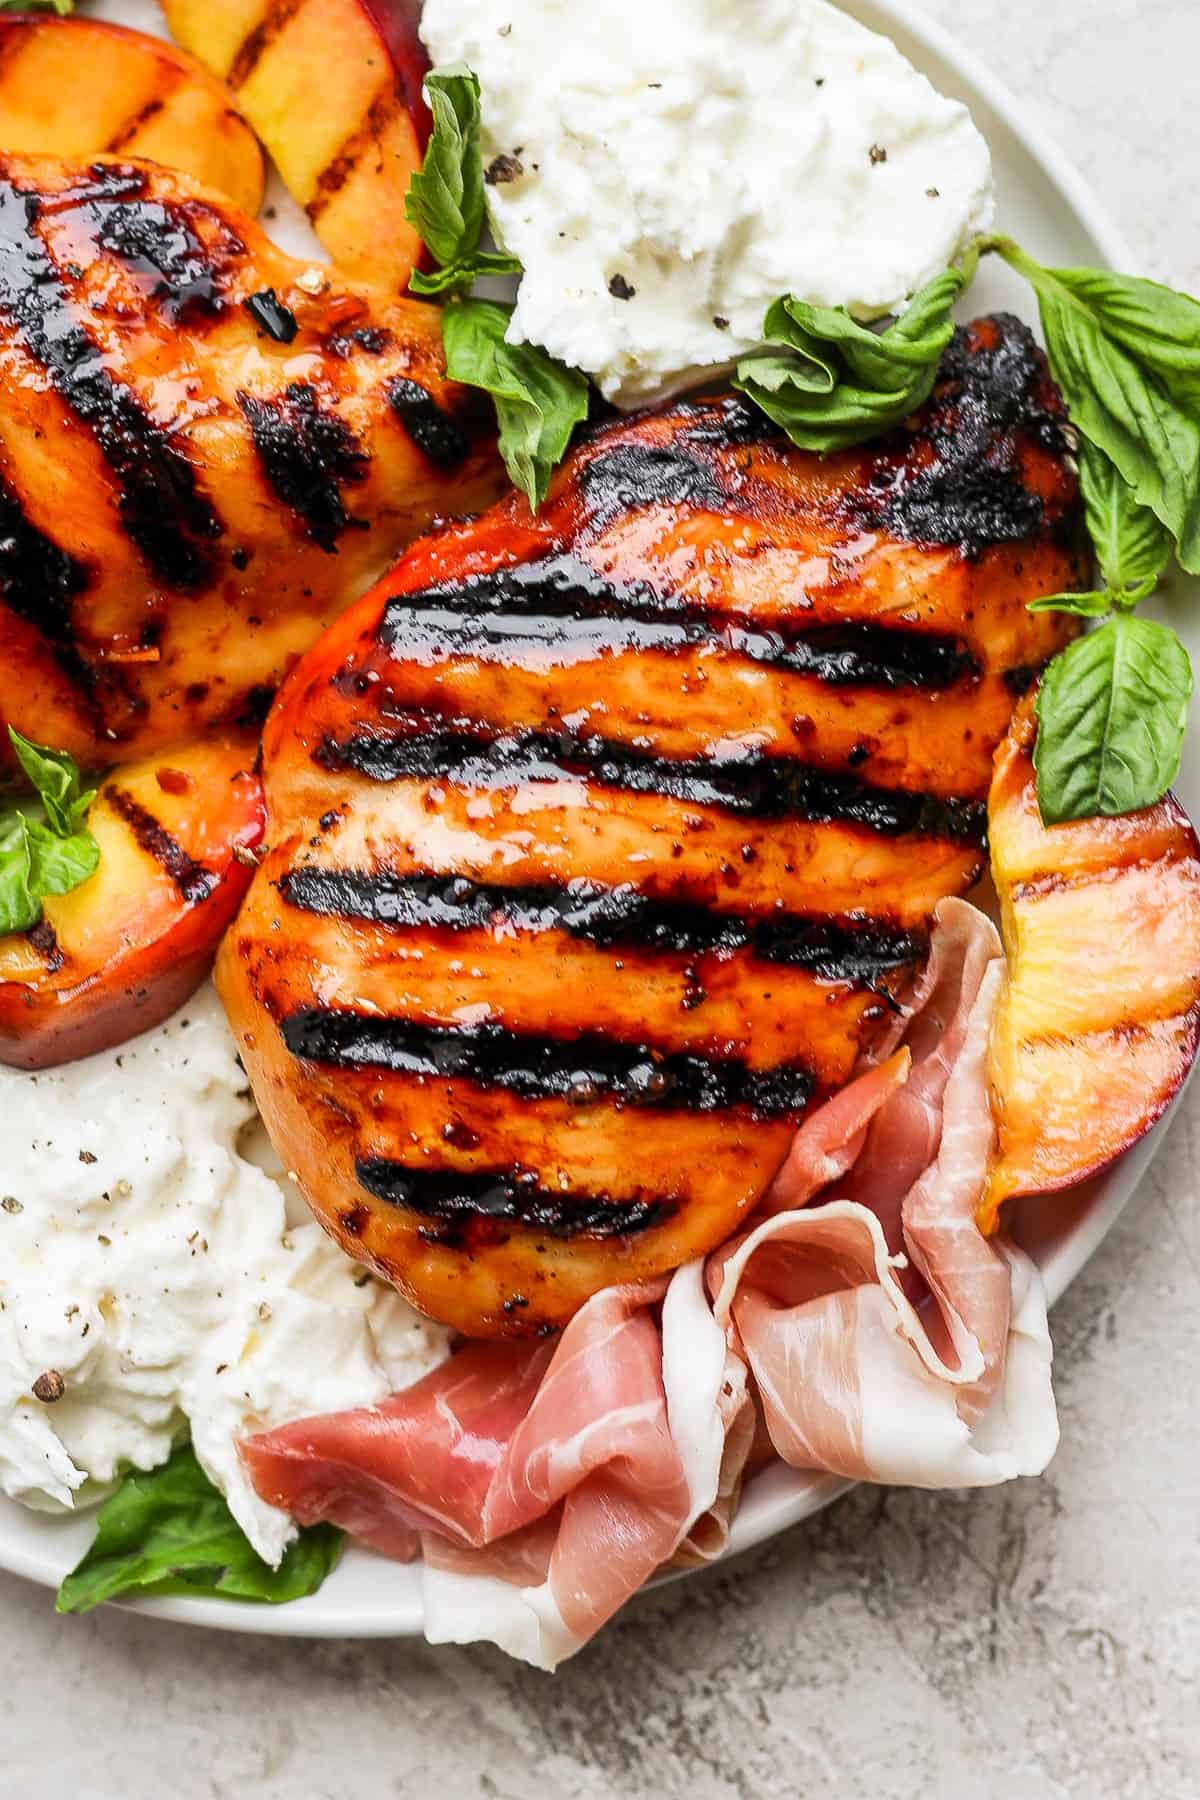 One grilled chicken breast surrounded by grilled peaches, burrata cheese, prosciutto, and fresh basil leaves.